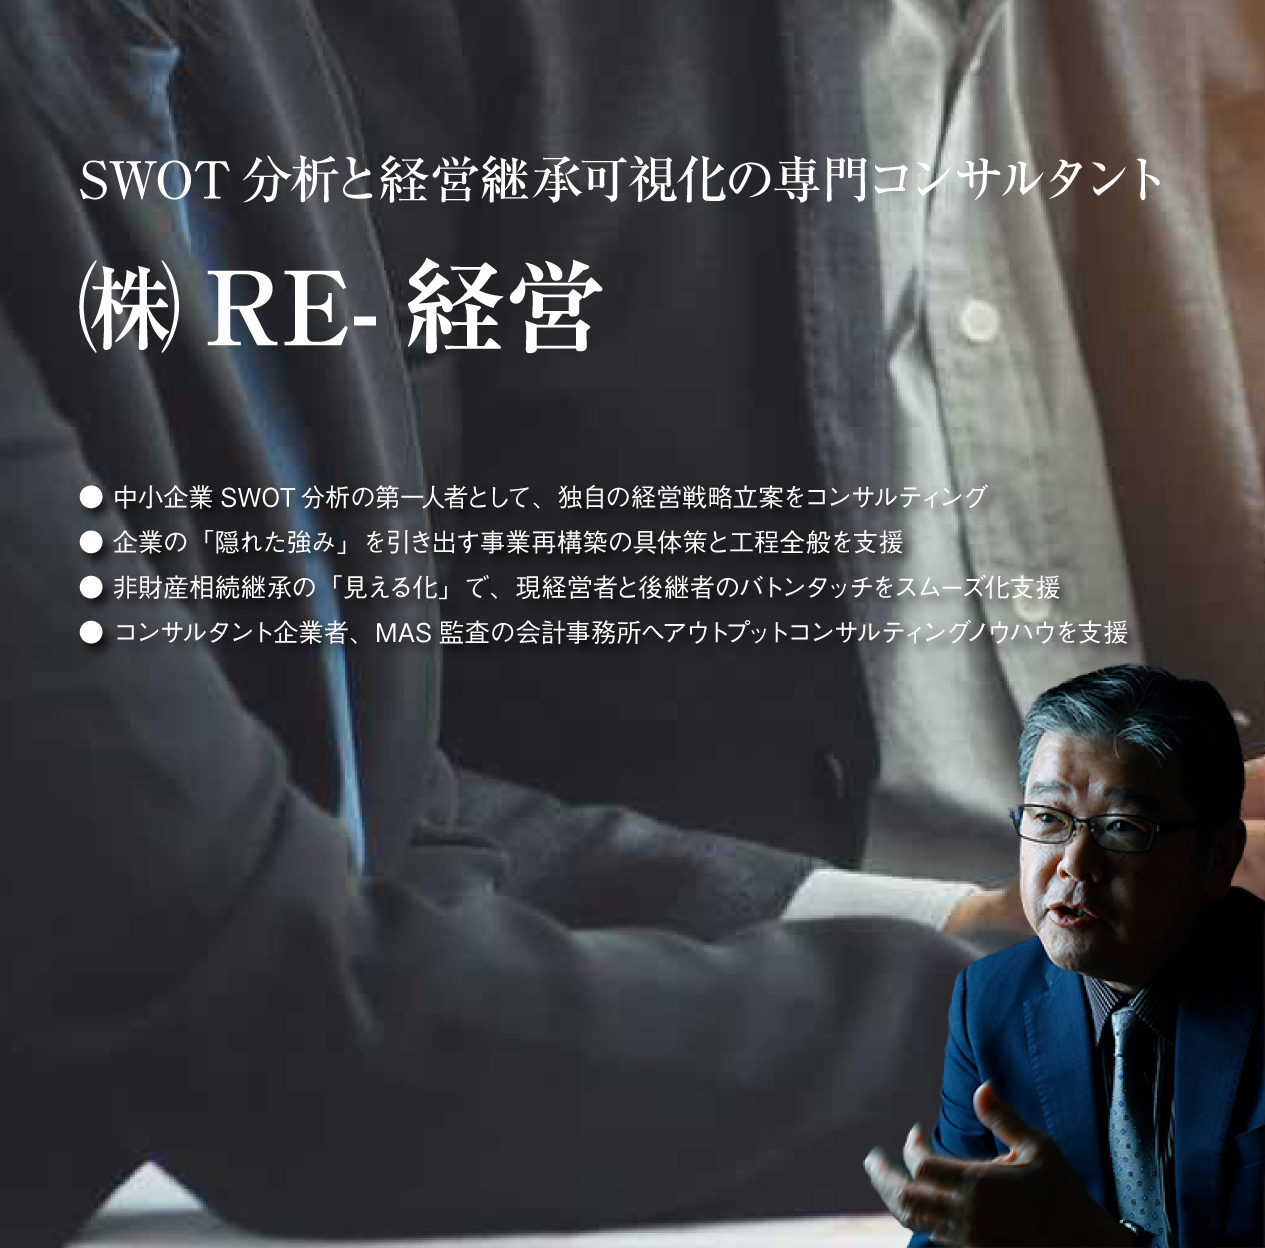 RE経営